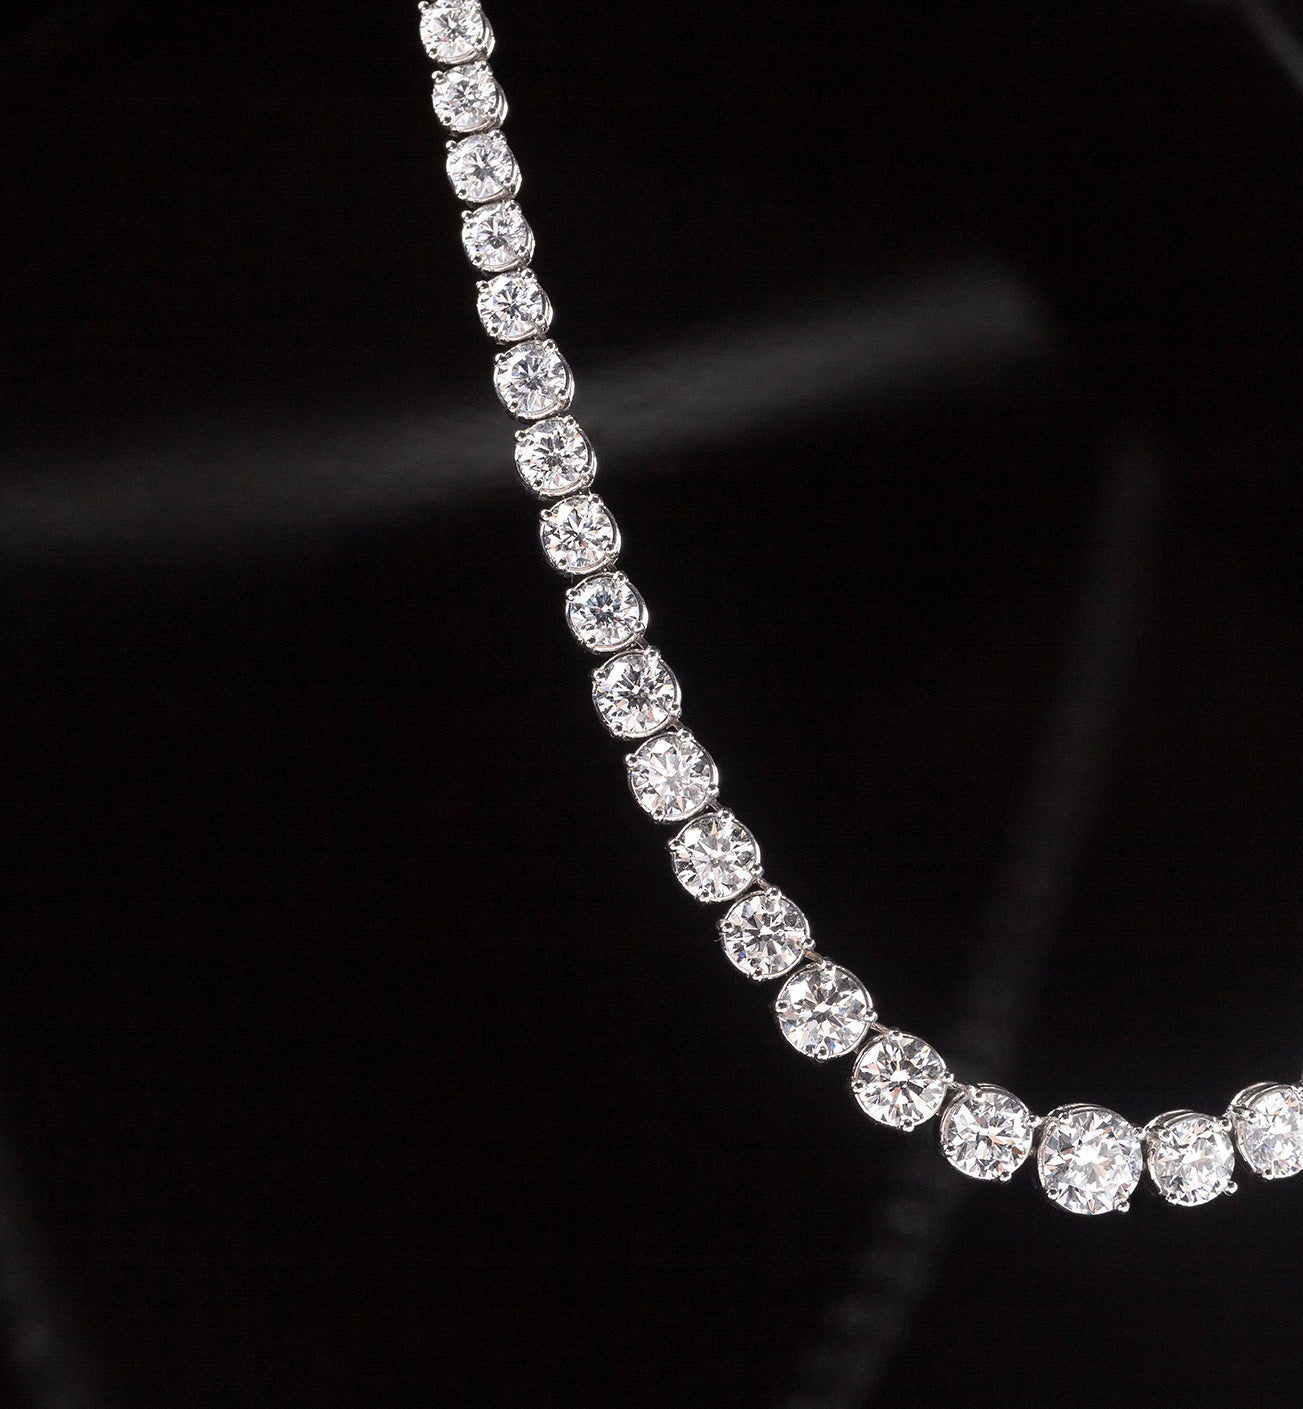 The Collier Rivière Necklace features graduated diamonds - a crescendo towards the main (and largest) diamond that sits at the center of this necklace.